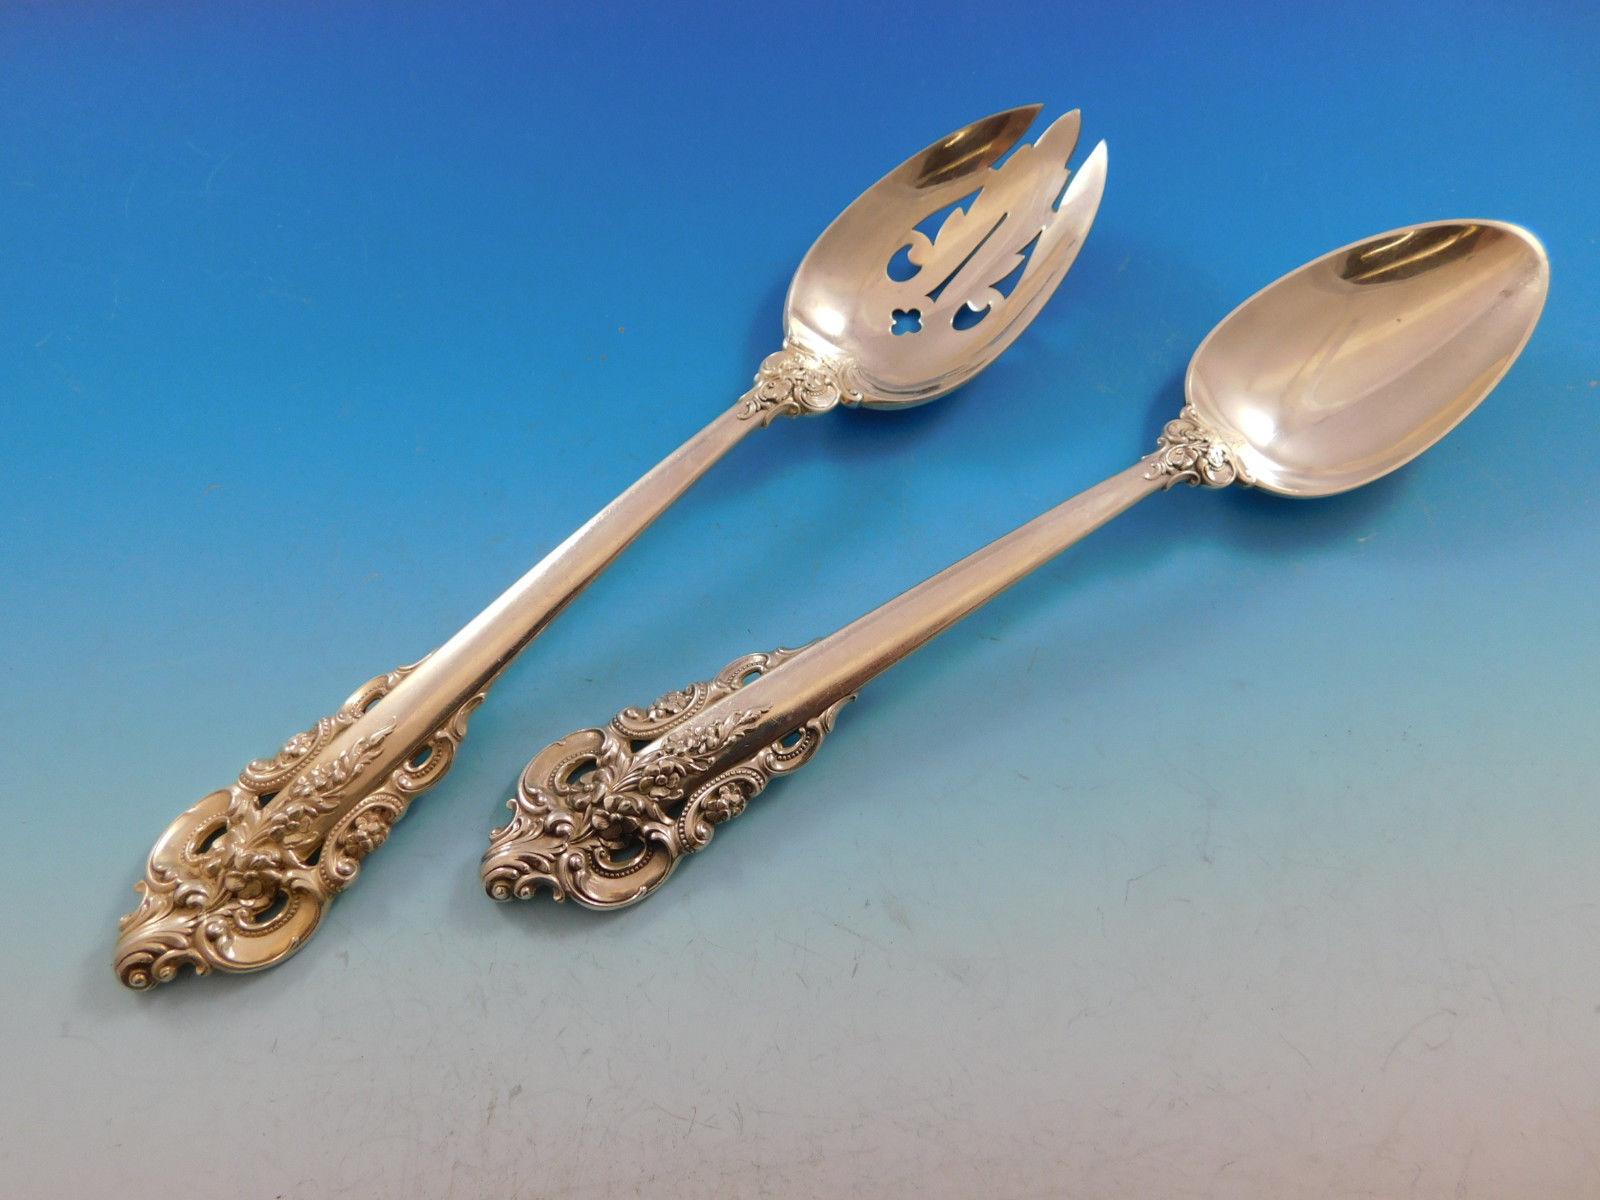 Sterling,1941 7-1/2” NM Details about   Iced-Beverage spoon Grande Baroque by WALLACE SILVER 